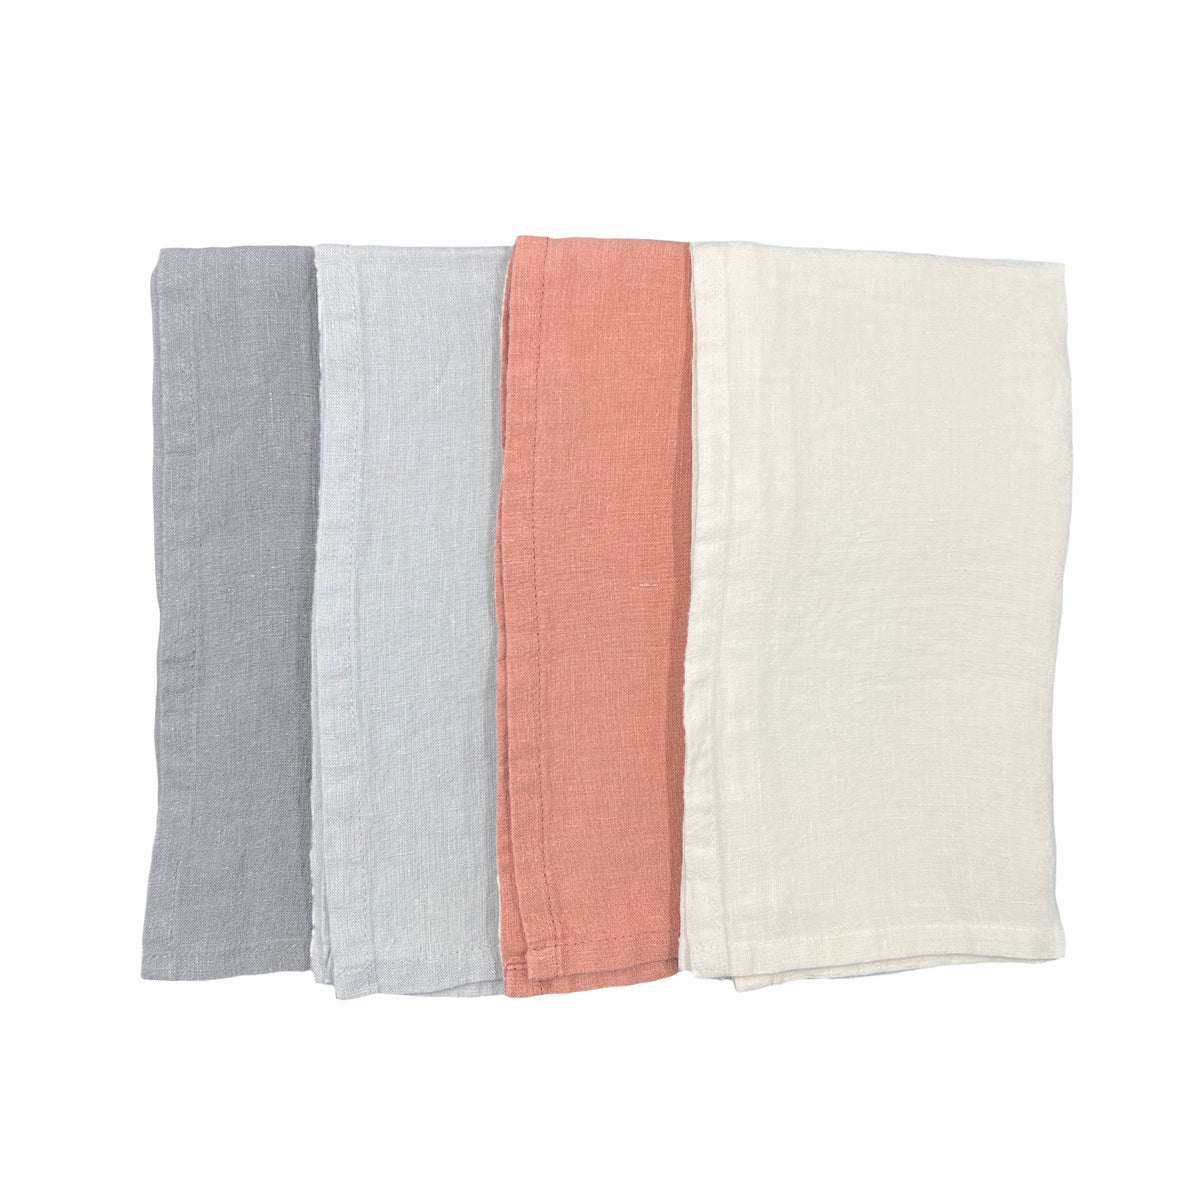 Stone Washed Linen Napkin in Linen- Set of 4